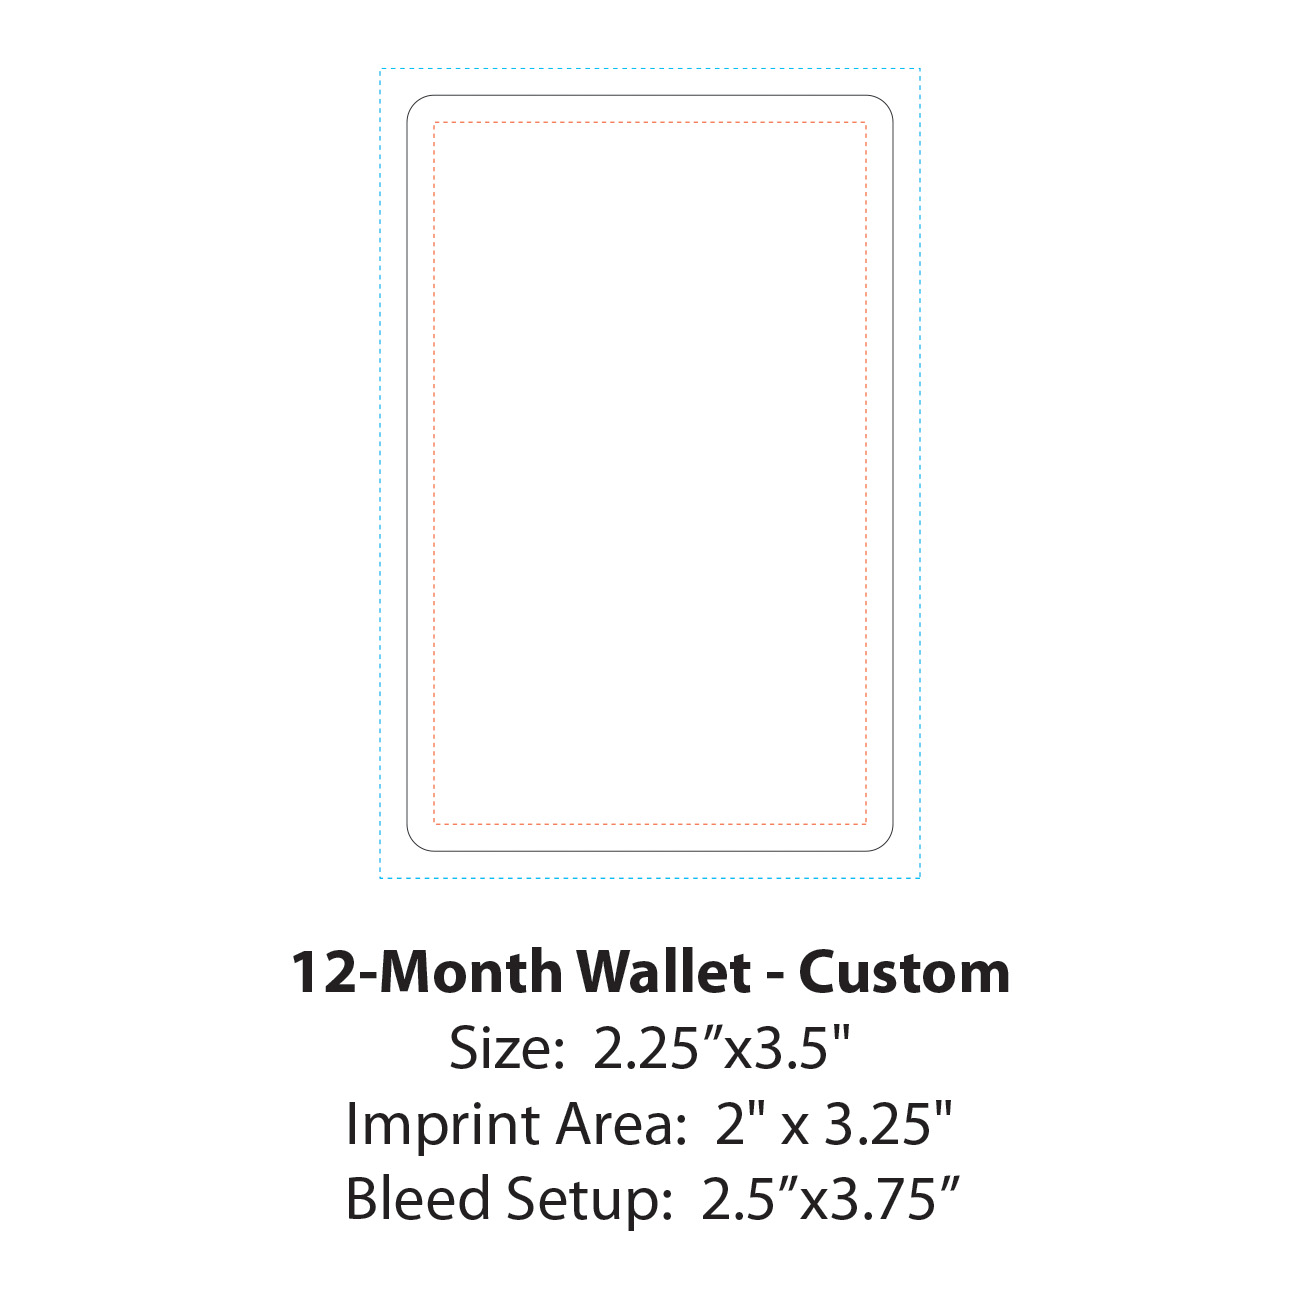 What Size Is A Wallet Photo - All You Need Infos